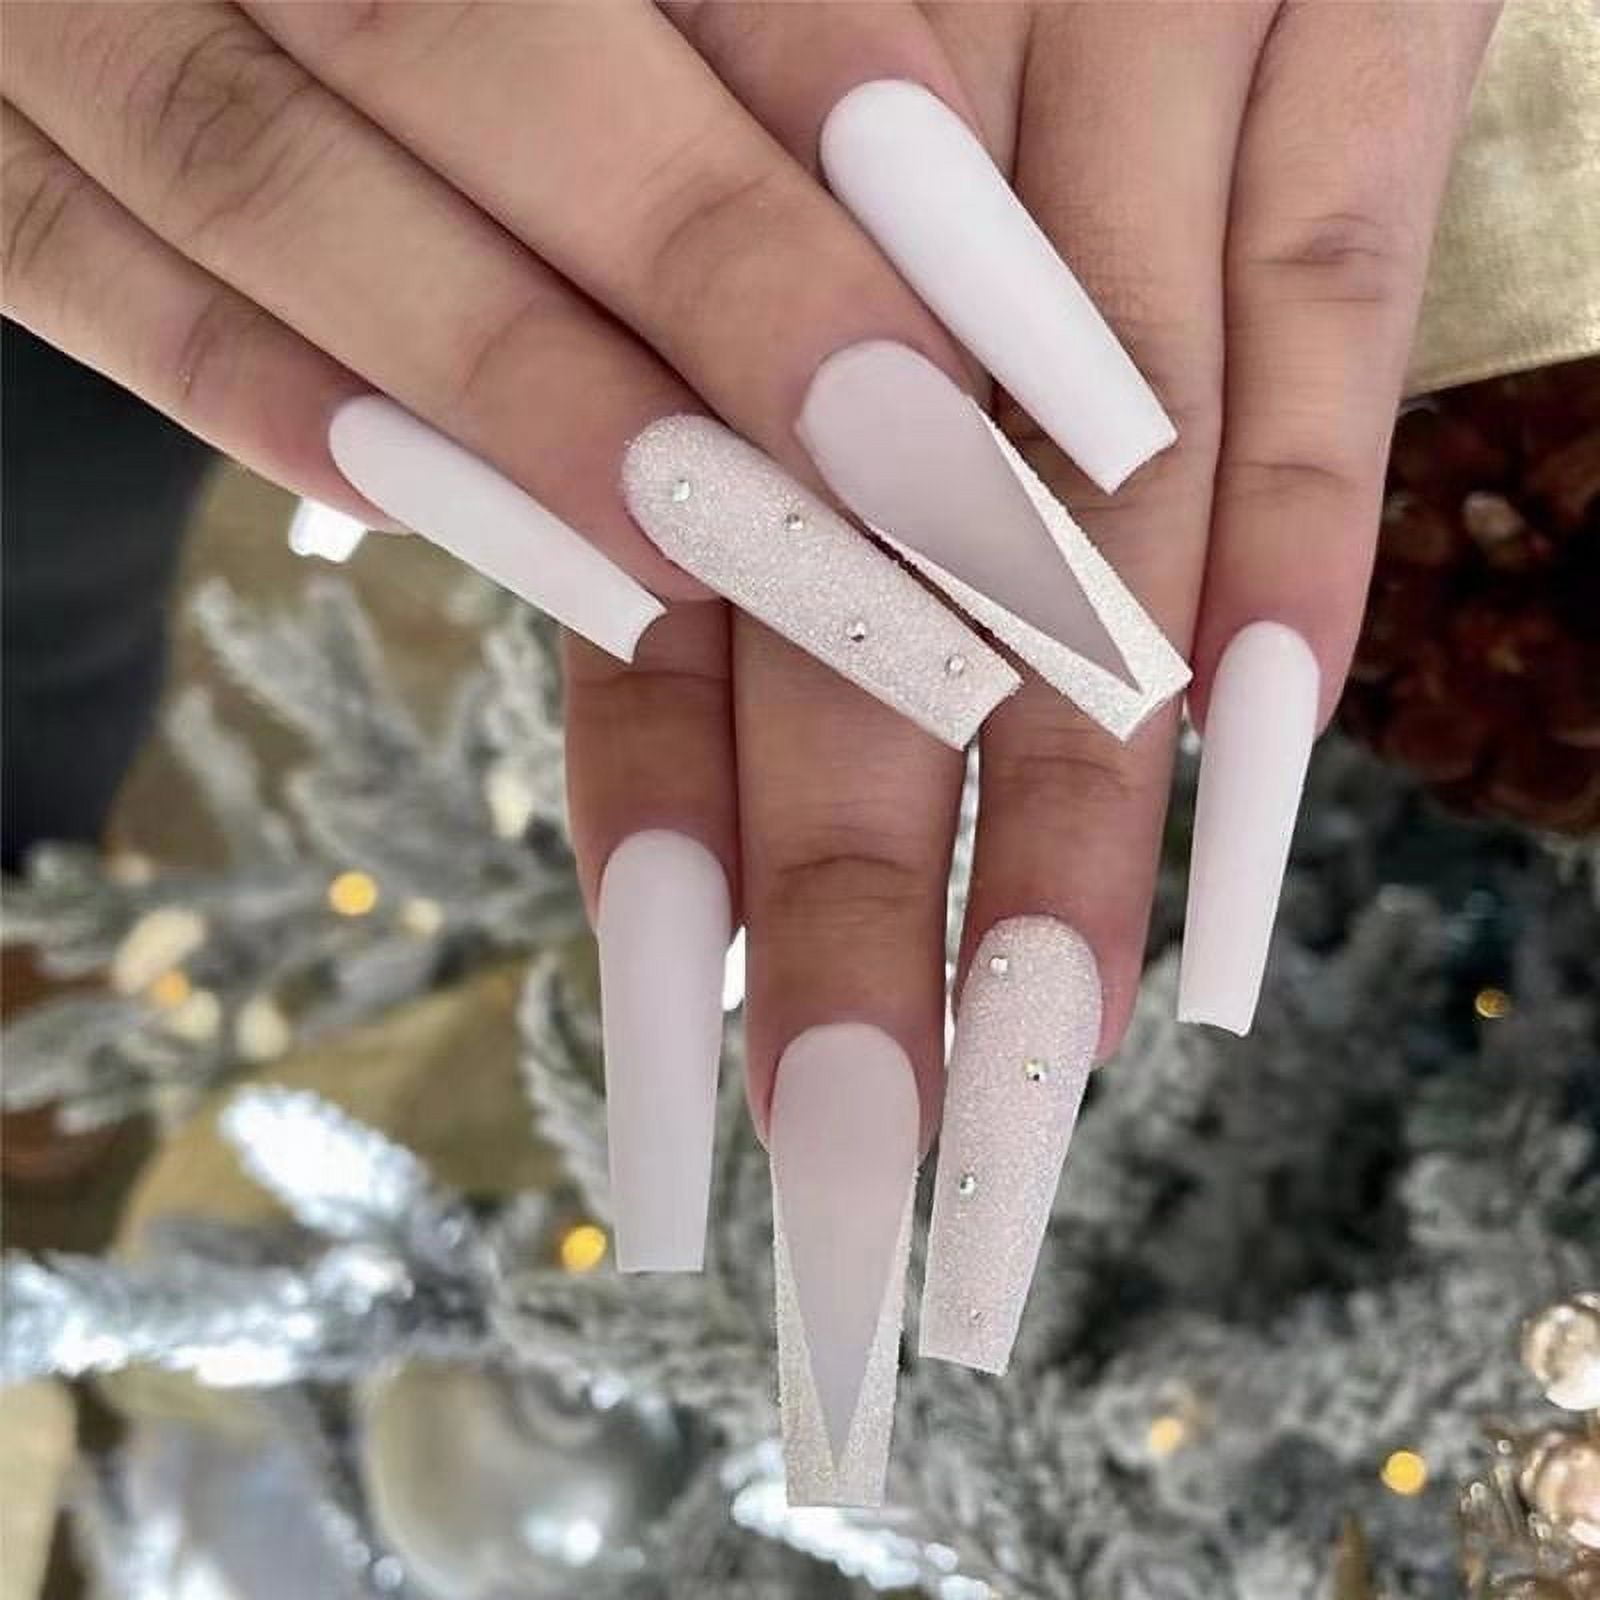 Glossy Ballerina Coffin Acrylic Nails Coffin Natural Beige Brown ABS, Extra  Long, Press On, Glossy Finish With Glue Sticker 24 X 0826 From  Us_mississippi, $3.95 | DHgate.Com